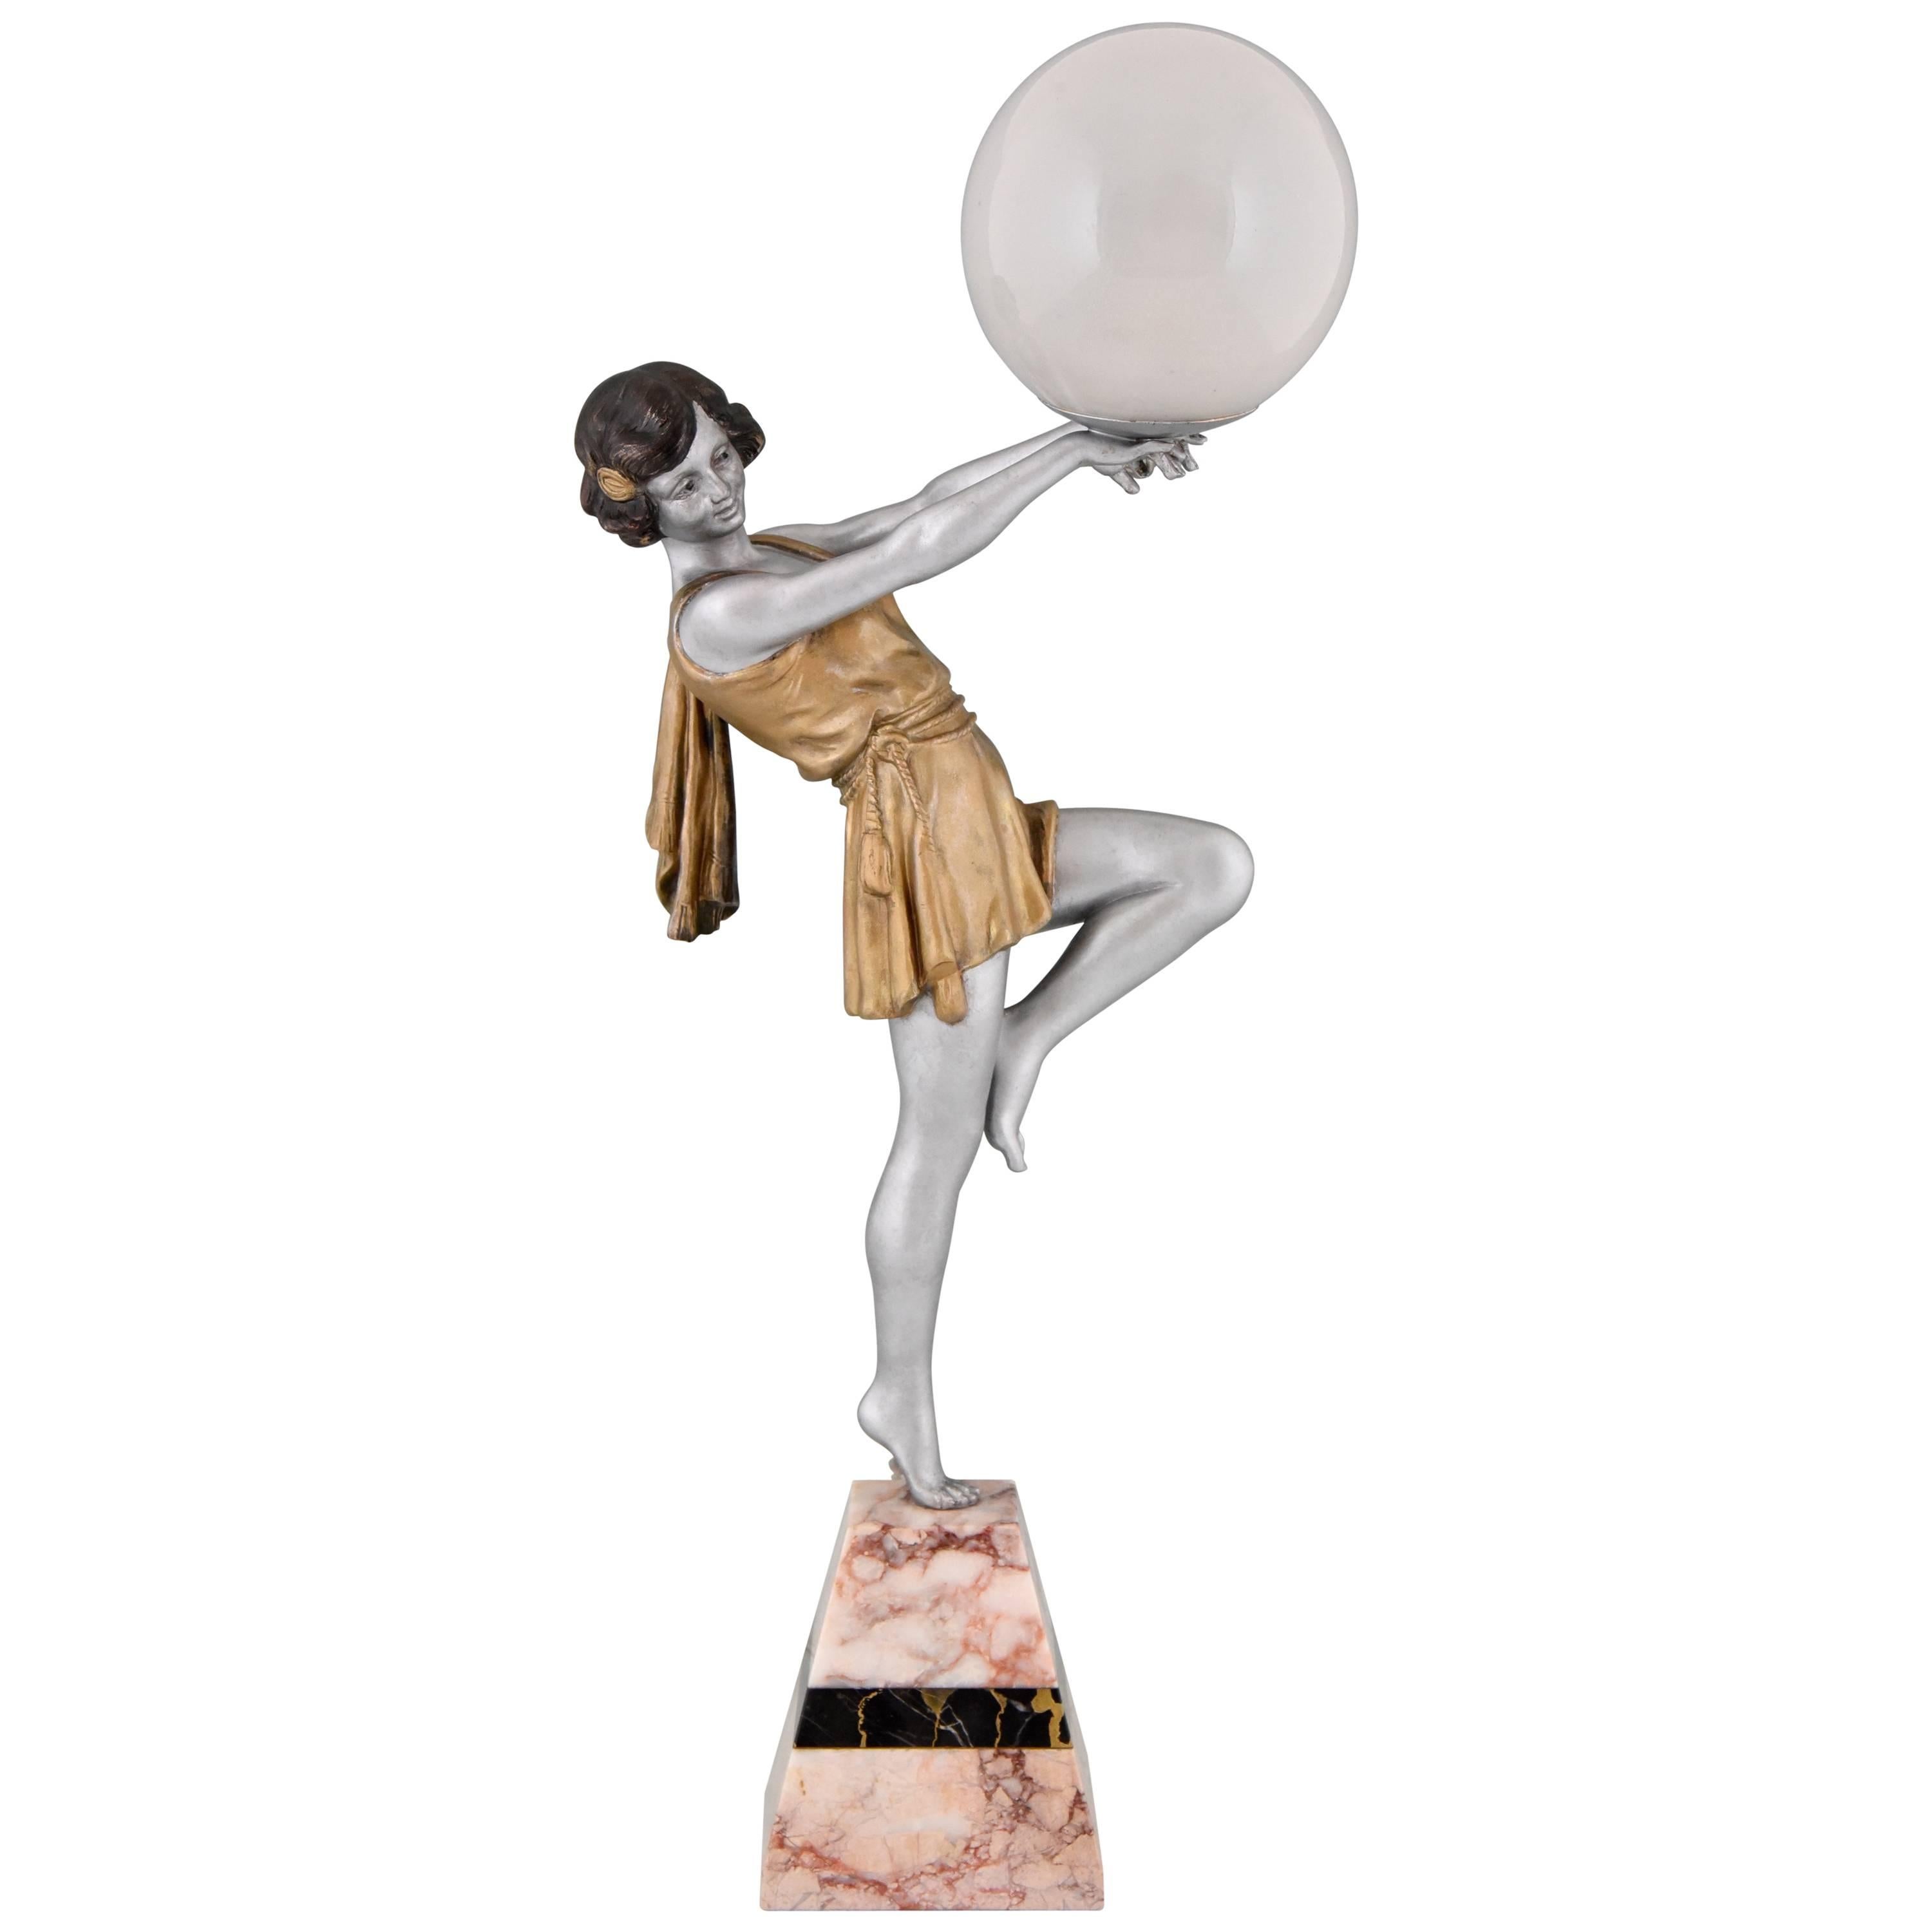 French Art Deco Lamp Lady Holding a Globe by Carlier, 1930